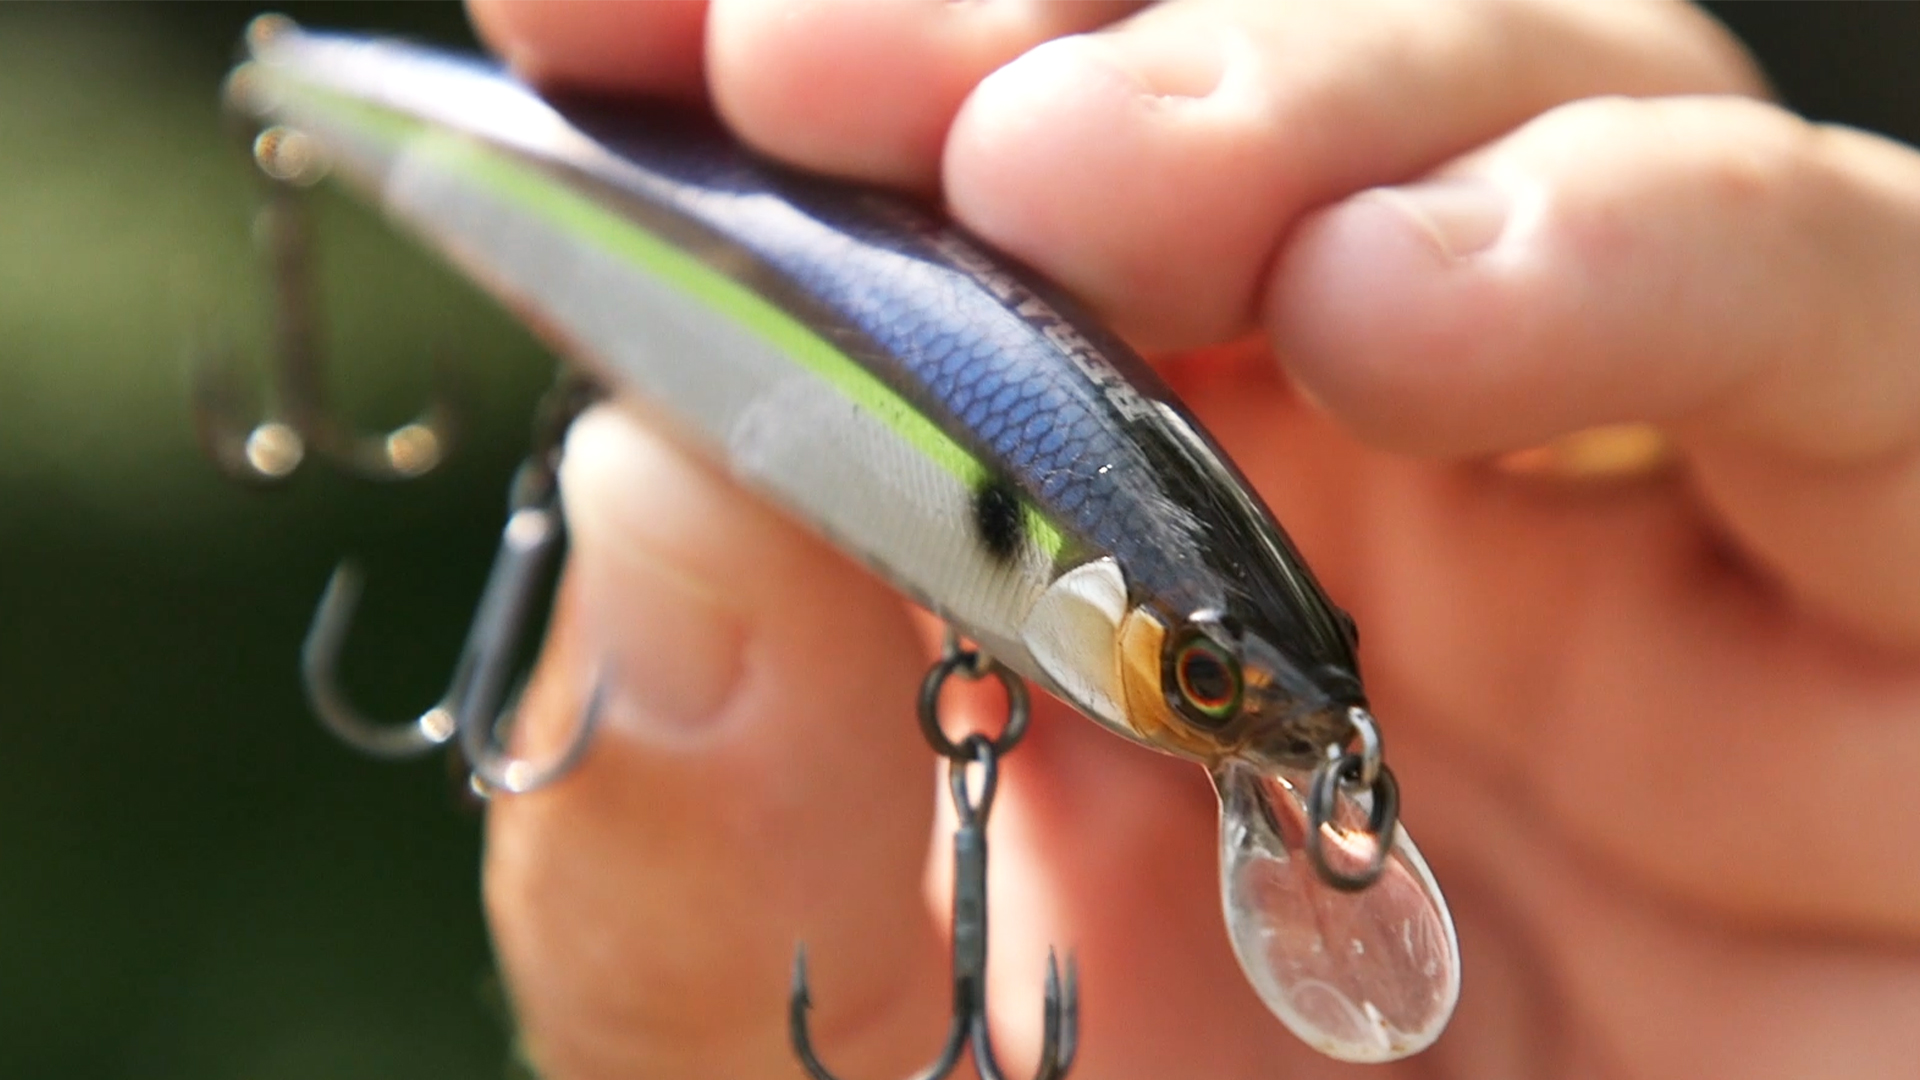 Ask the Anglers: What's Your Go-To Wintertime Bait? - Major League Fishing